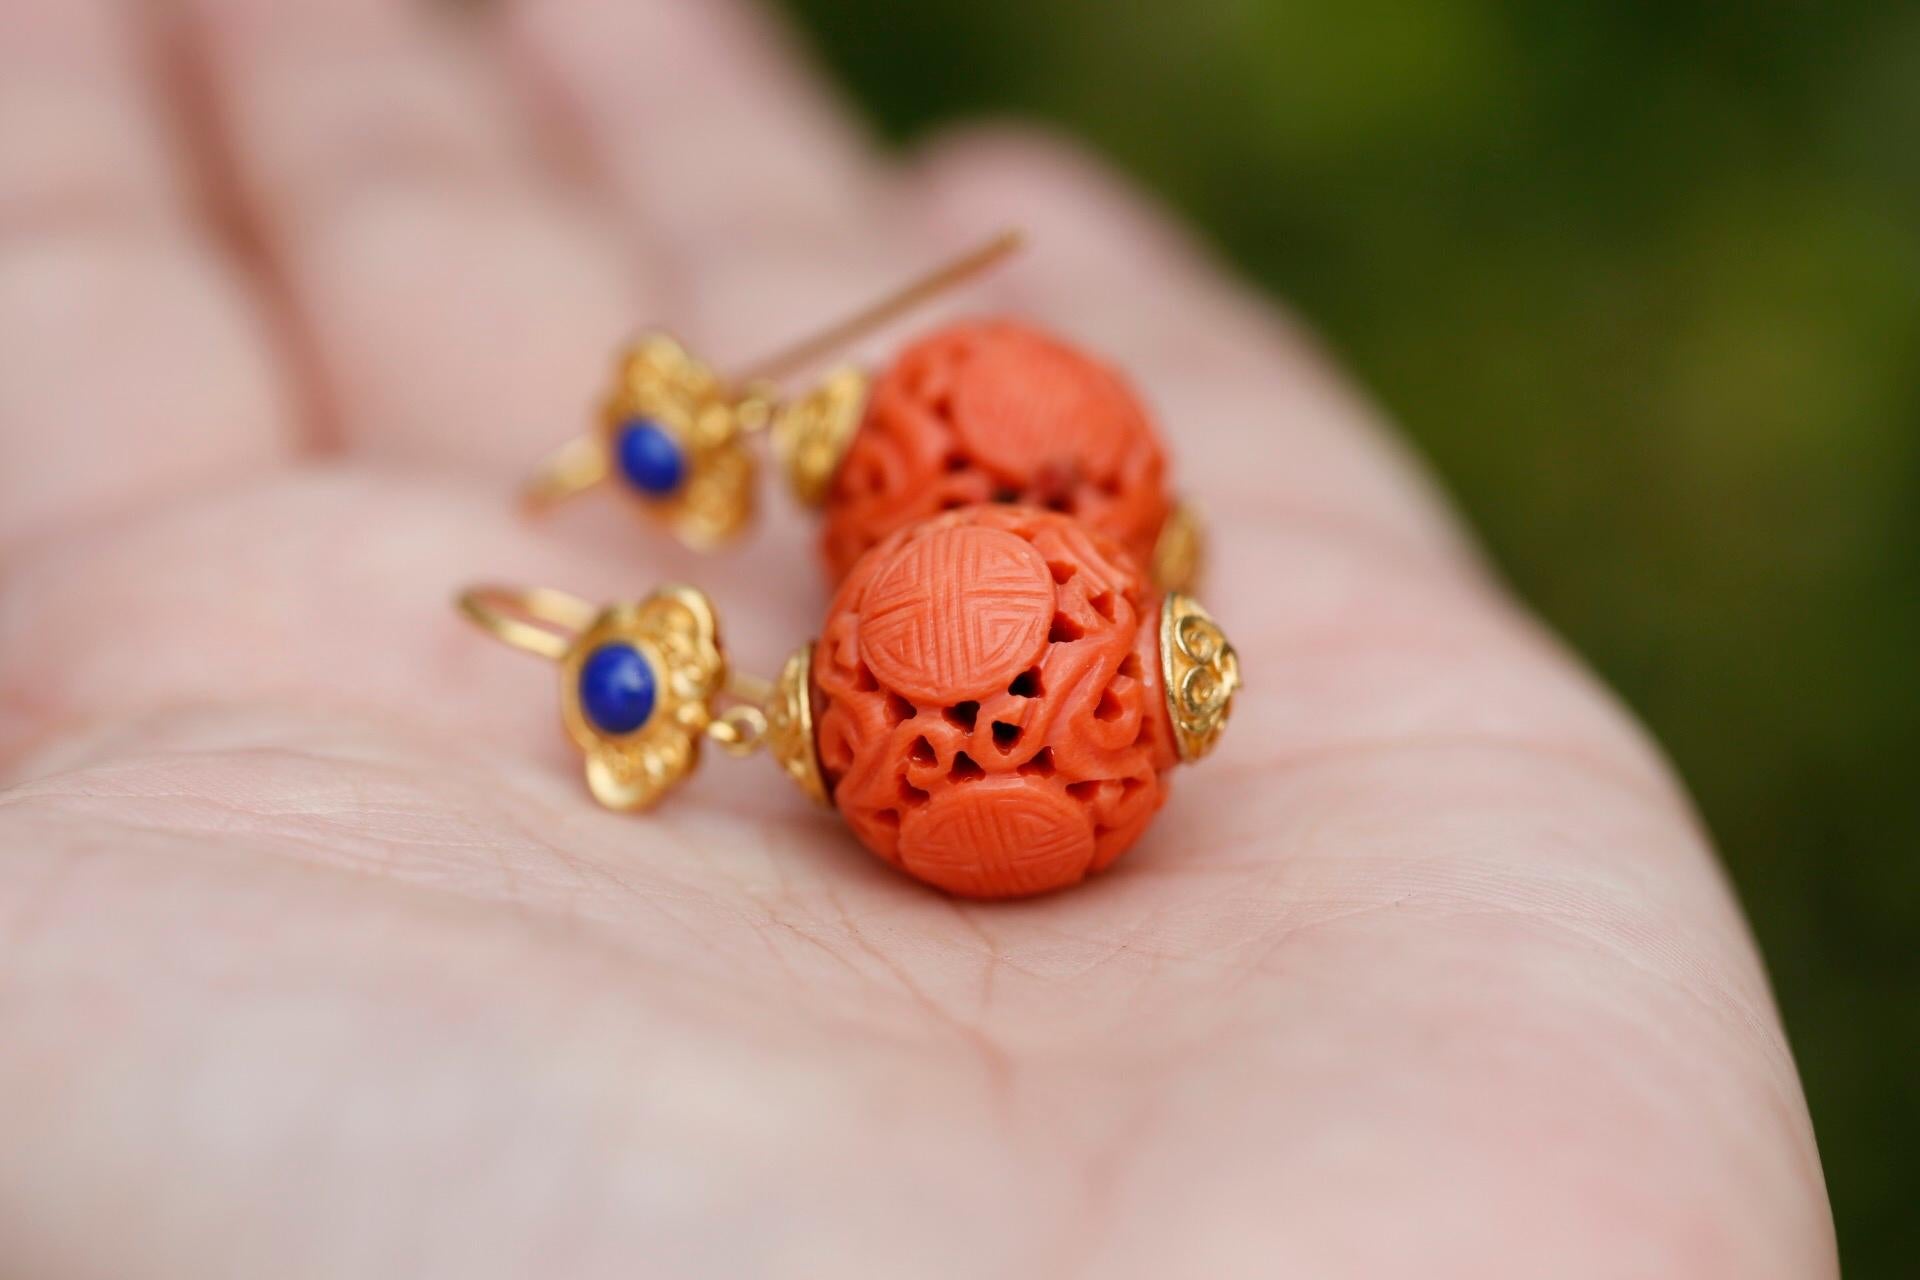 Exquisitely carved 19th century antique coral beads, measuring roughly 12mm each, hang below deep blue lapis lazuli pieces measuring roughly 2.8mm. Around the lapis is Chinese style scrolling in rich yellow gold. A final touch of gold finishes these